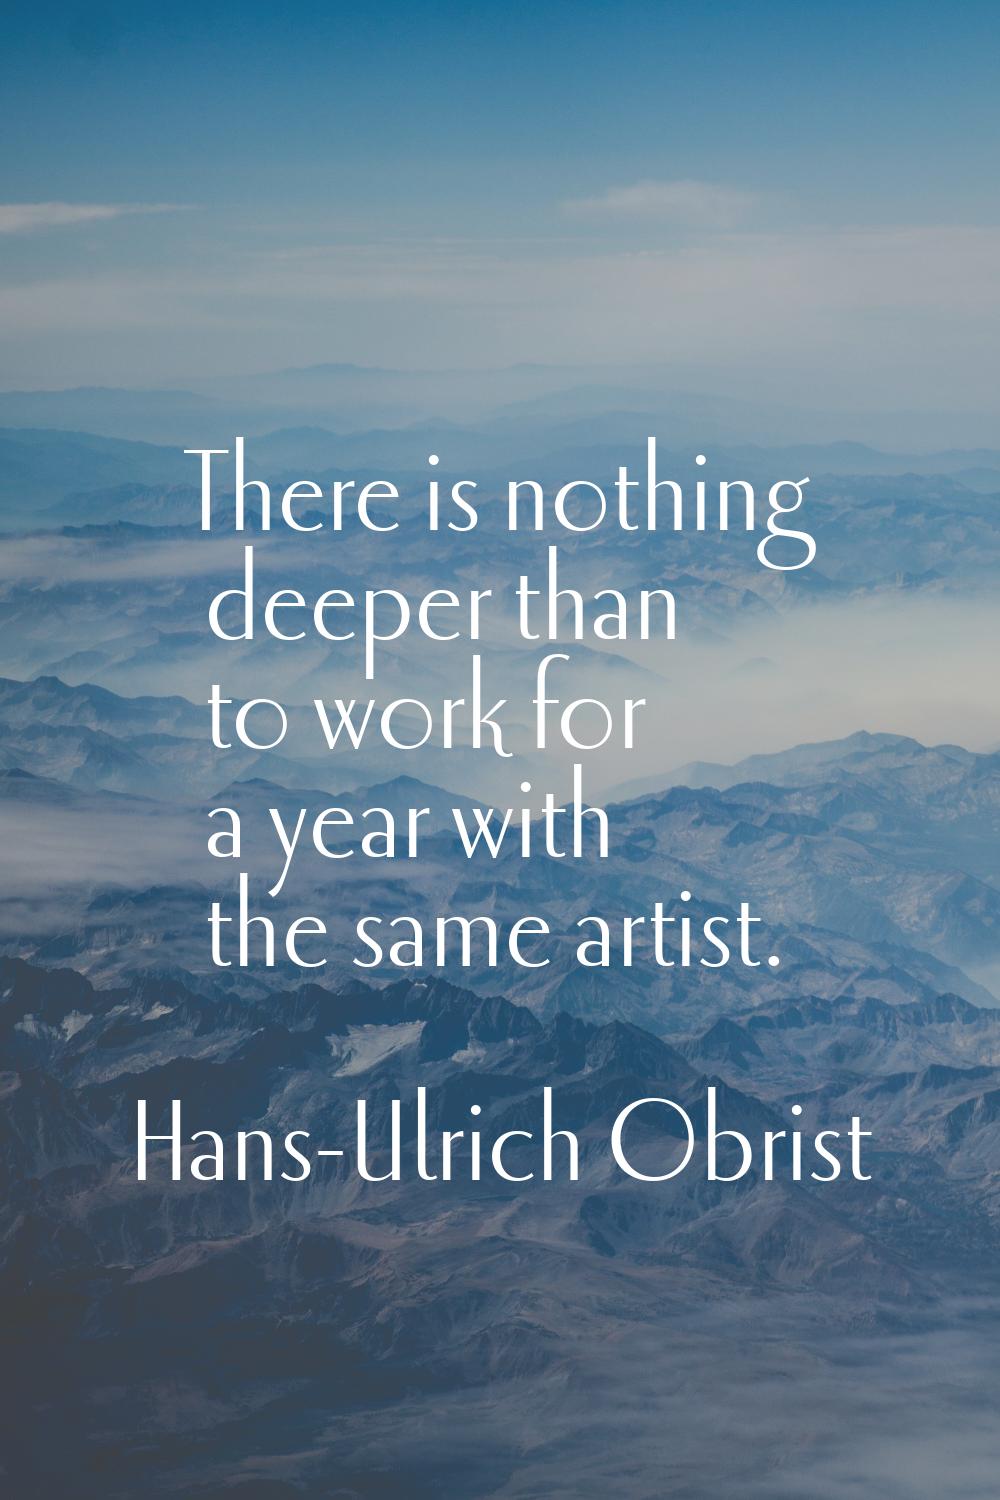 There is nothing deeper than to work for a year with the same artist.